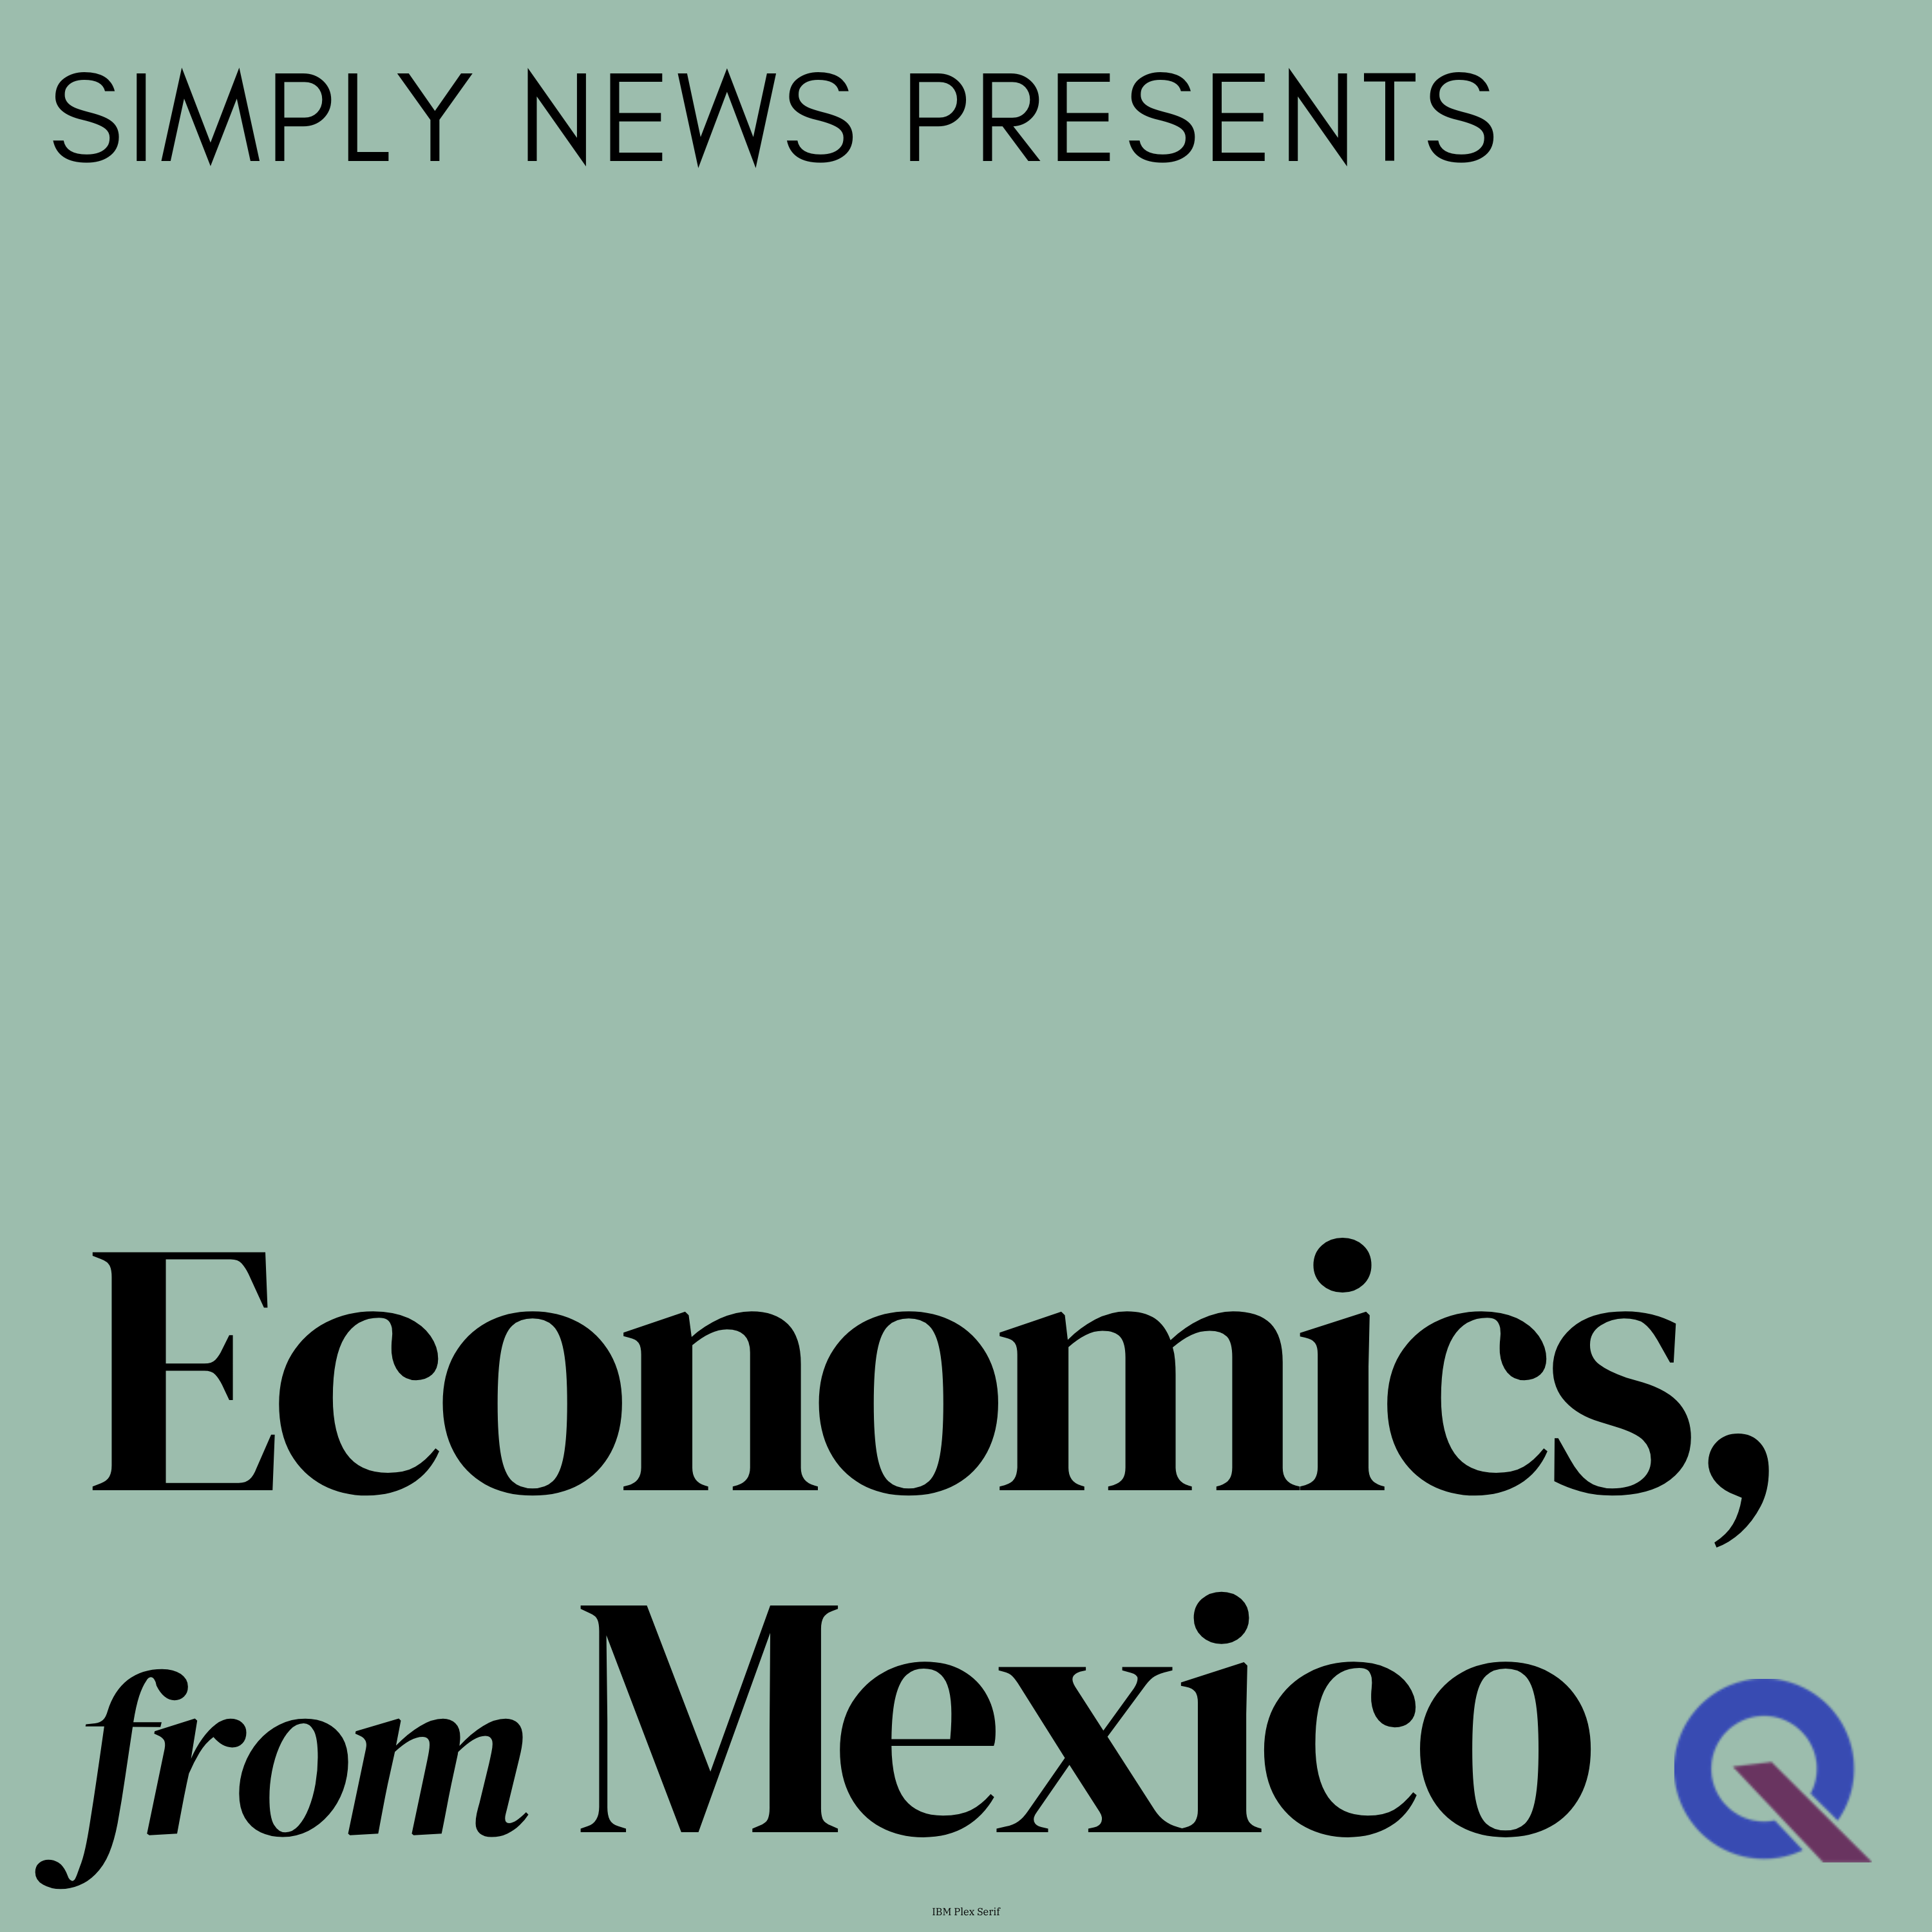 Simply Economics, from Mexico